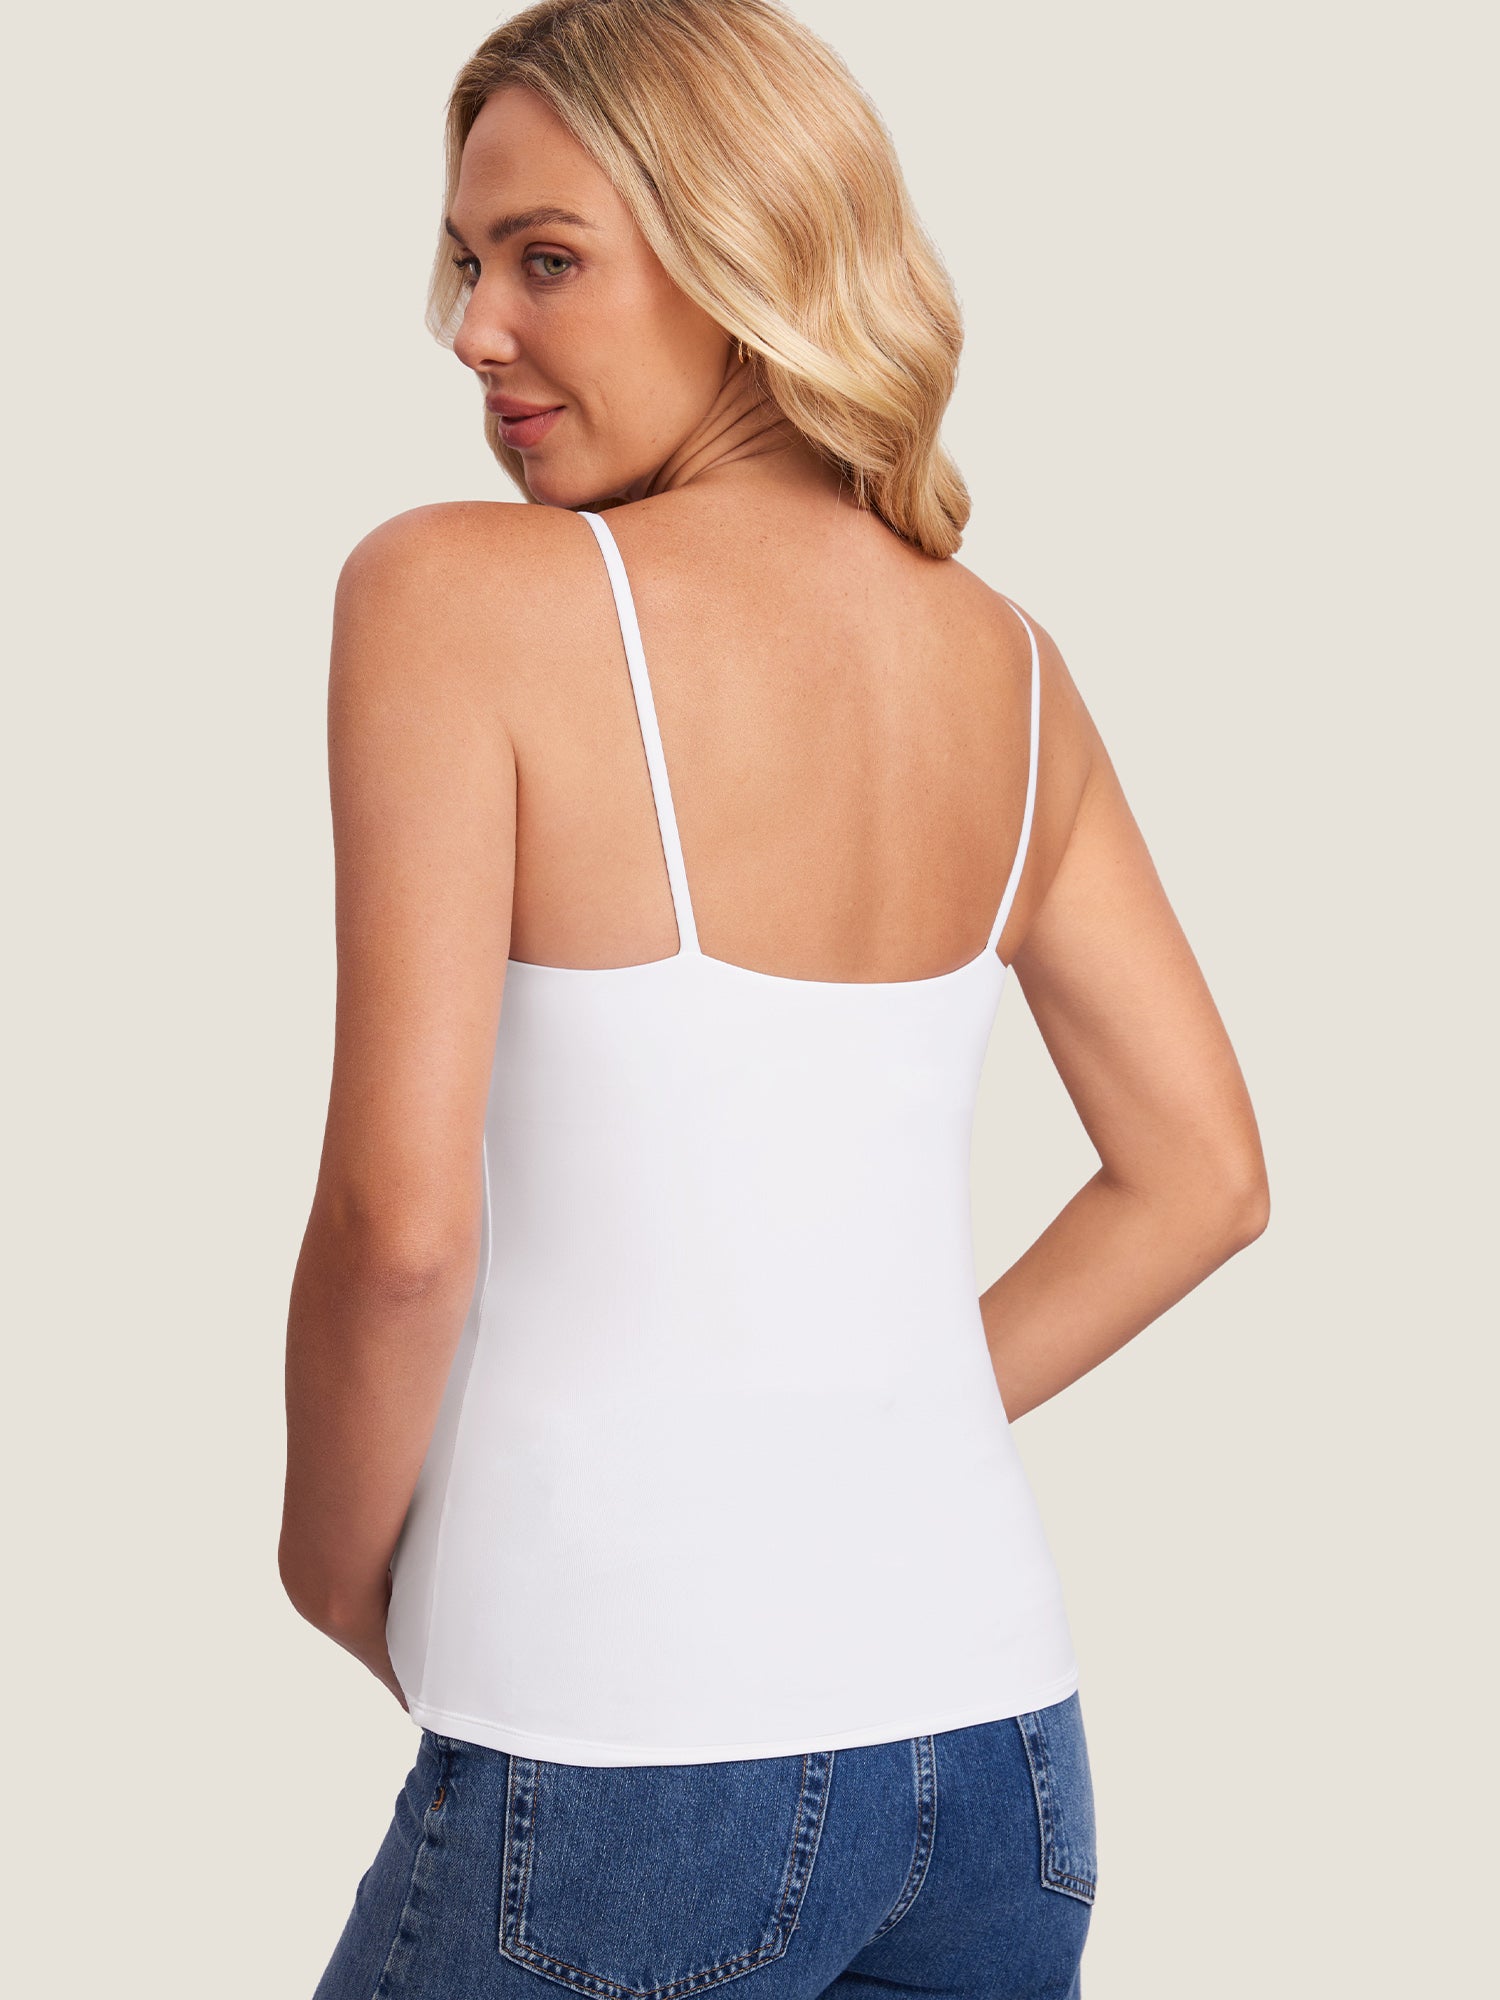 Inbarely® Maternity Camisole Tank Top White